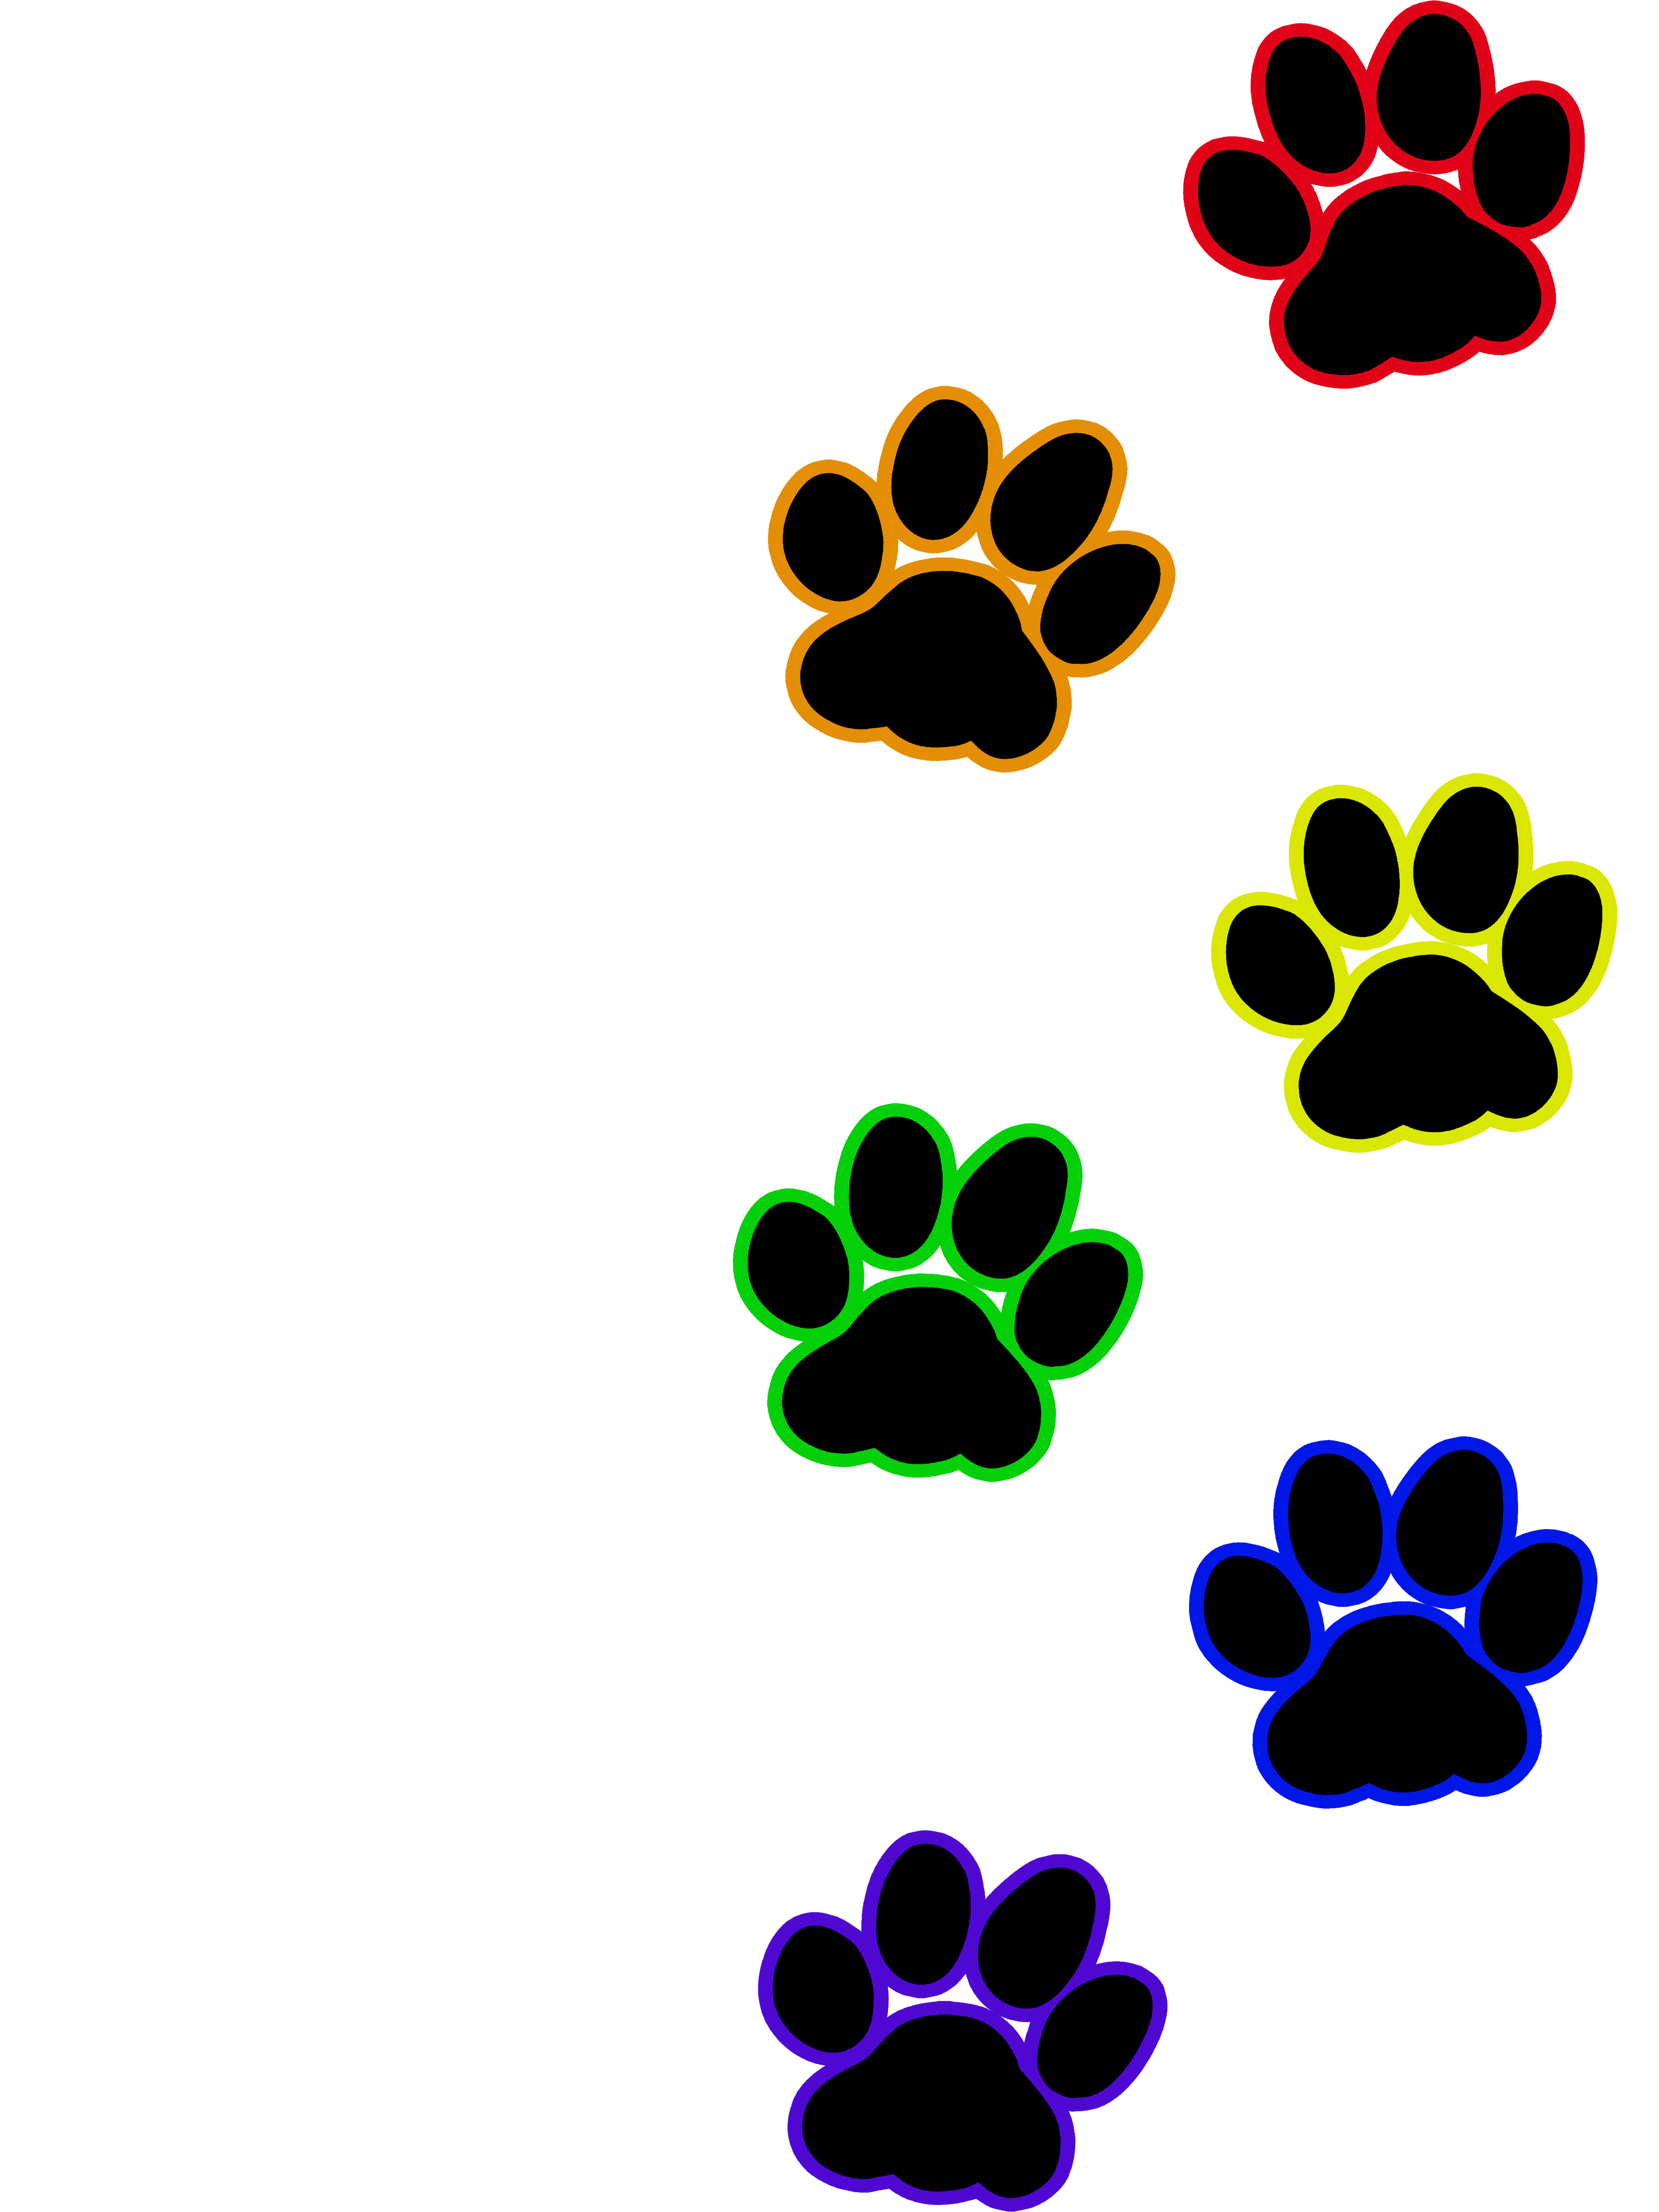 226700 Cat Paw Stock Photos Pictures  RoyaltyFree Images  iStock   Dog paw Paw print Dog